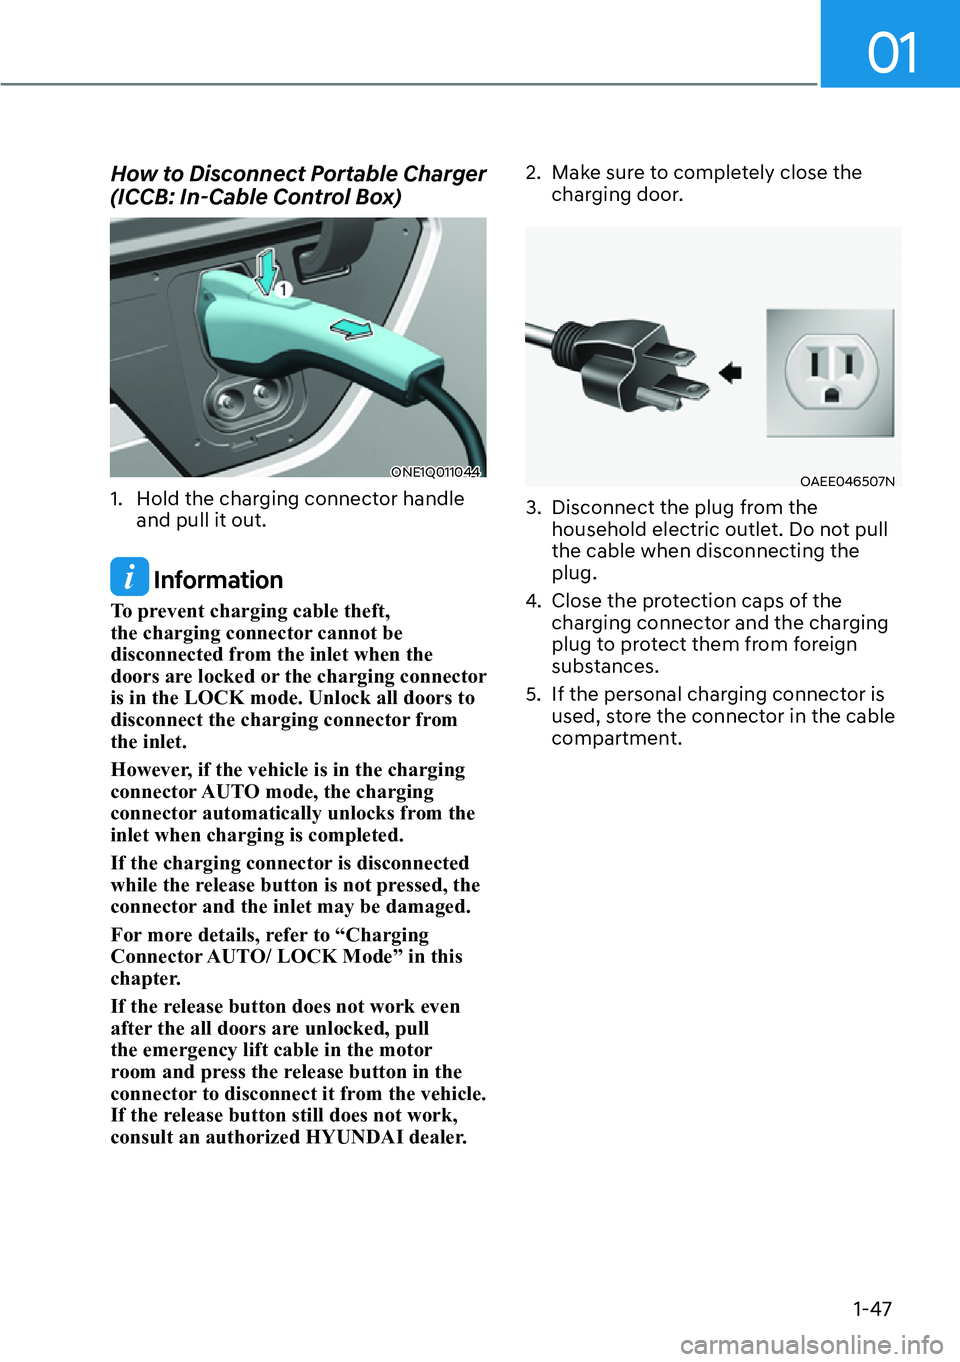 HYUNDAI IONIQ 5 2022  Owners Manual 01
1-47
How to Disconnect Portable Charger 
(ICCB: In-Cable Control Box)
ONE1Q011044
1.  Hold the charging connector handle 
and pull it out.
 Information
To prevent charging cable theft, 
the chargin